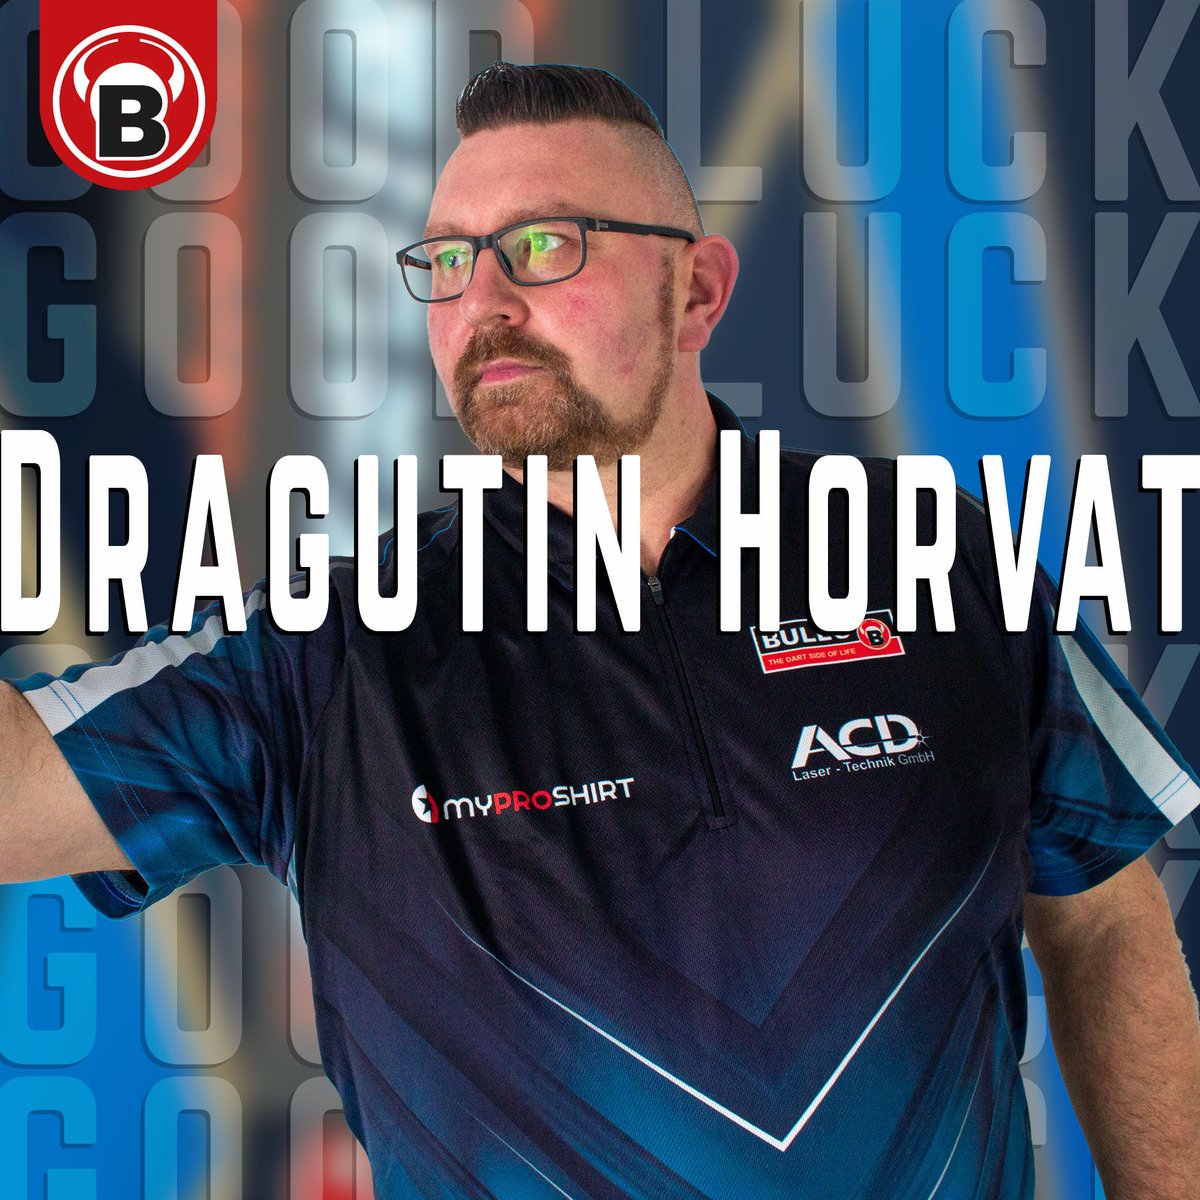 Dragutin Horvat has clinched his spot in the Darts World Championship once again, this time by emerging victorious in the Super League! 🏆🎯 For your opening match against your #bullsteam member Mike de Decker, we wish you both an unforgettable match. Rock the stage🤘 💥